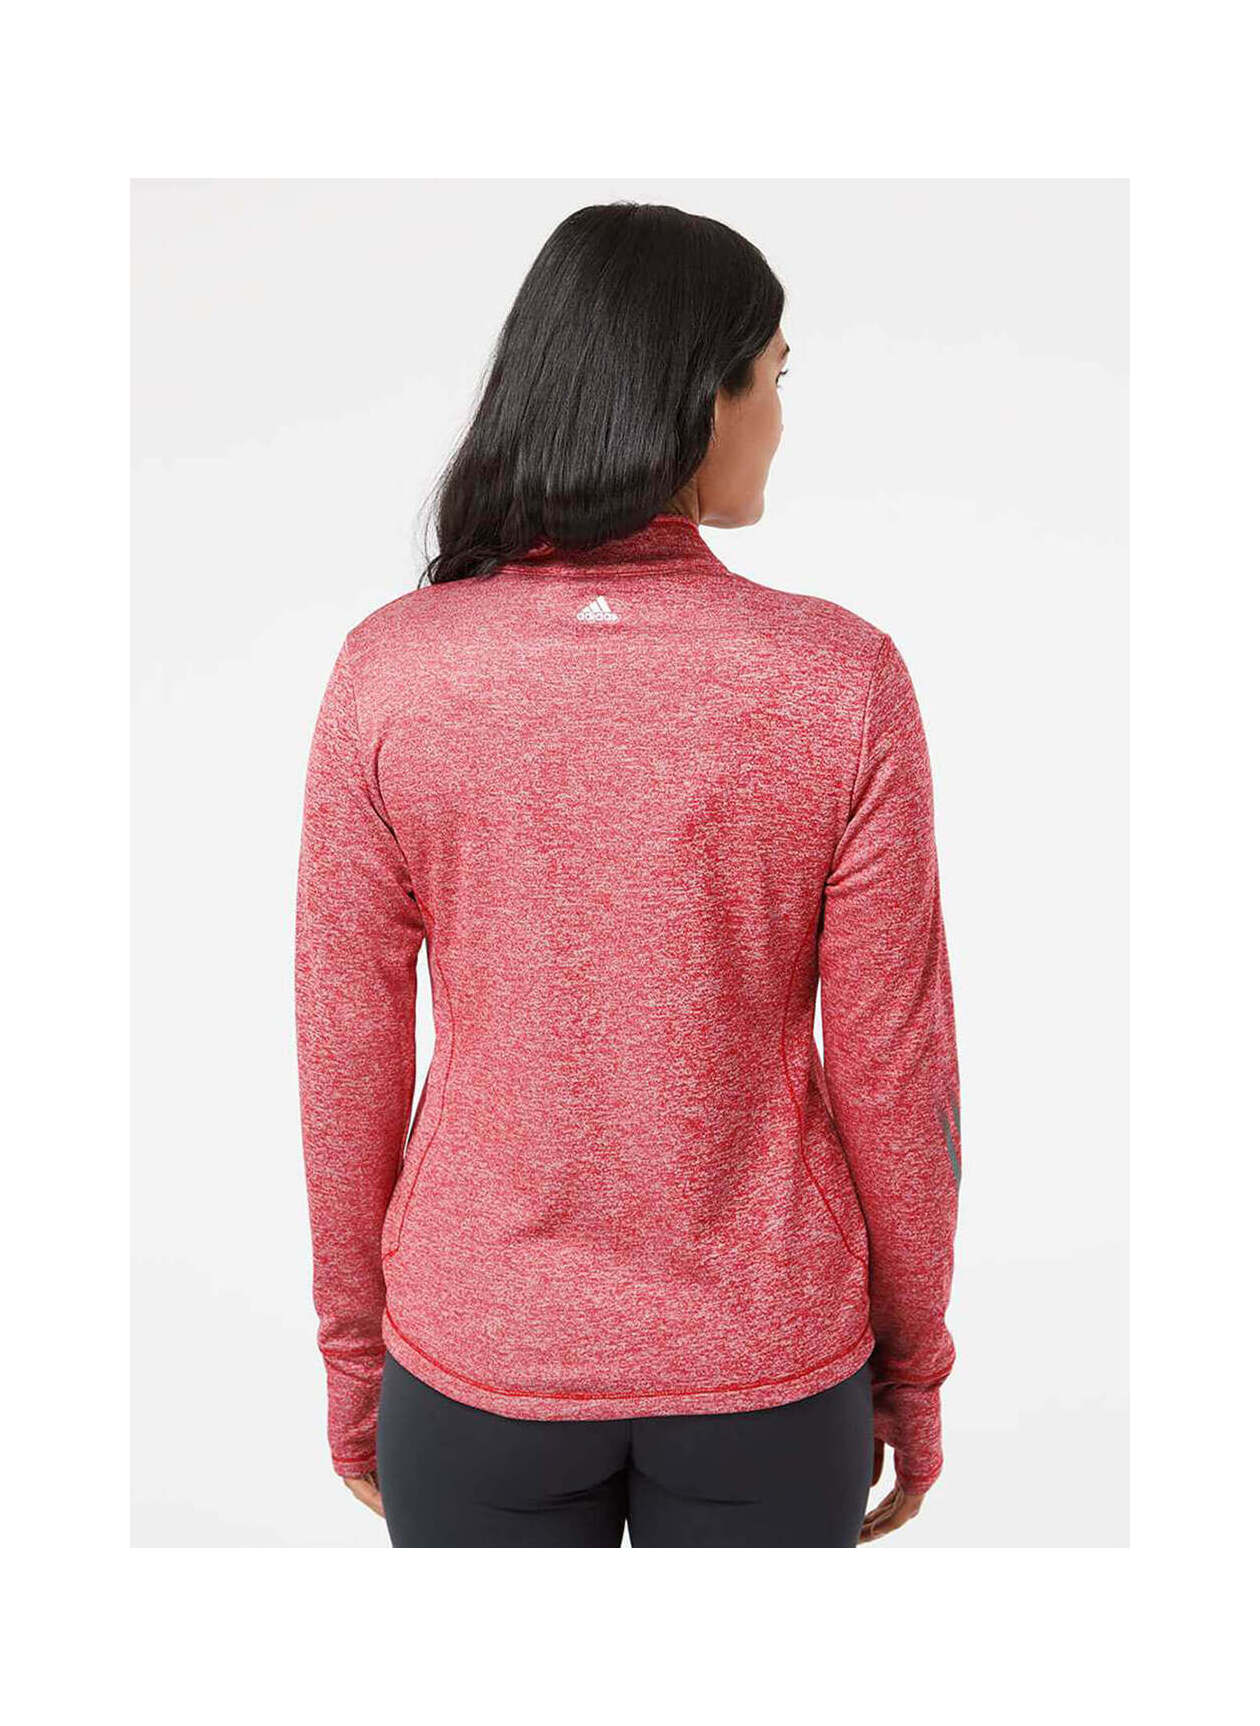 Adidas A285 Women's Brushed Terry Heather Quater-Zip Pullover Shirt 